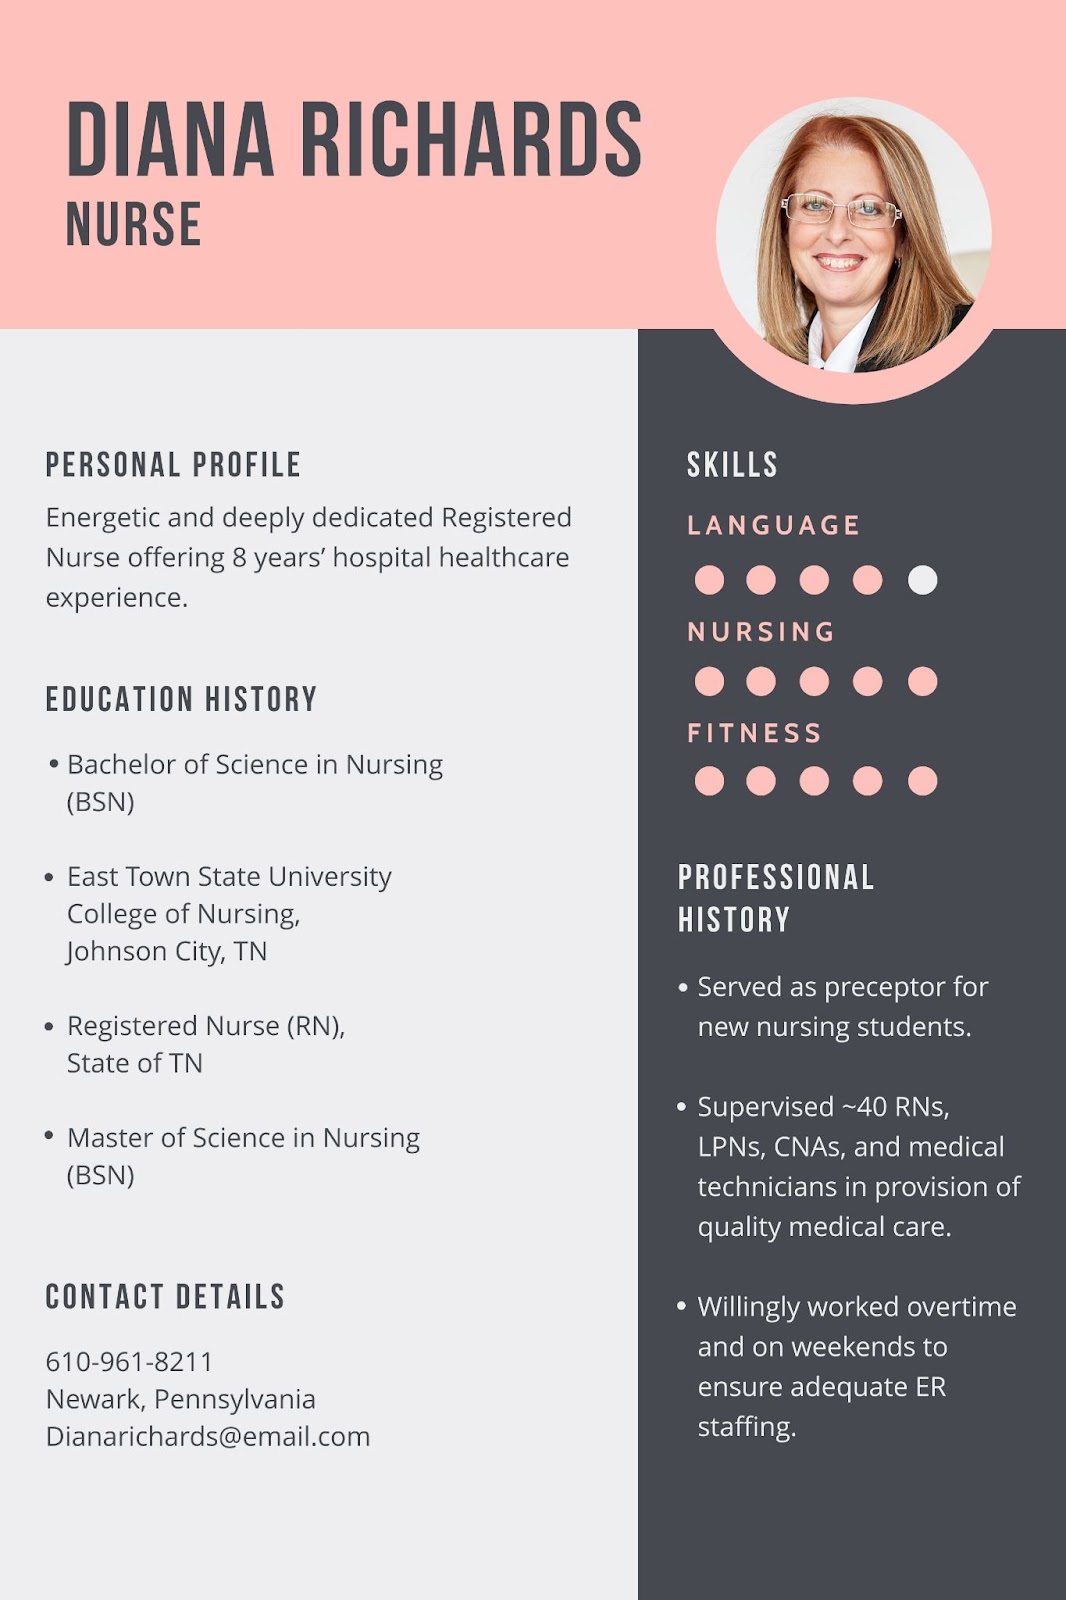 5 design tips to create a modern infographic resume